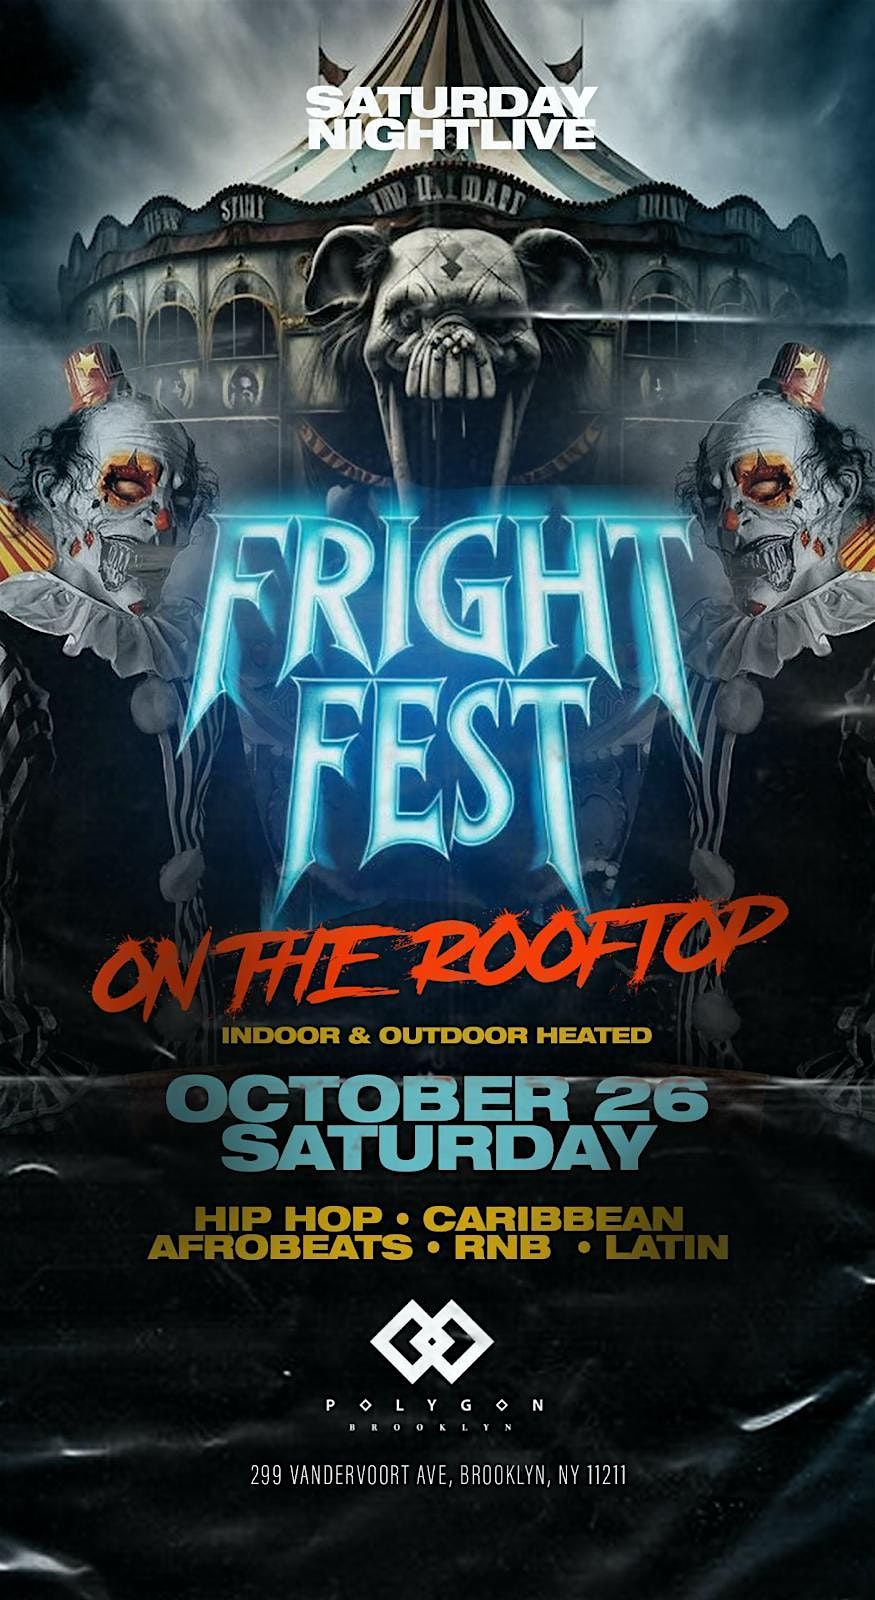 Fright Fest Halloween Costume Party @ Polygon BK Free entry w\/ RSVP